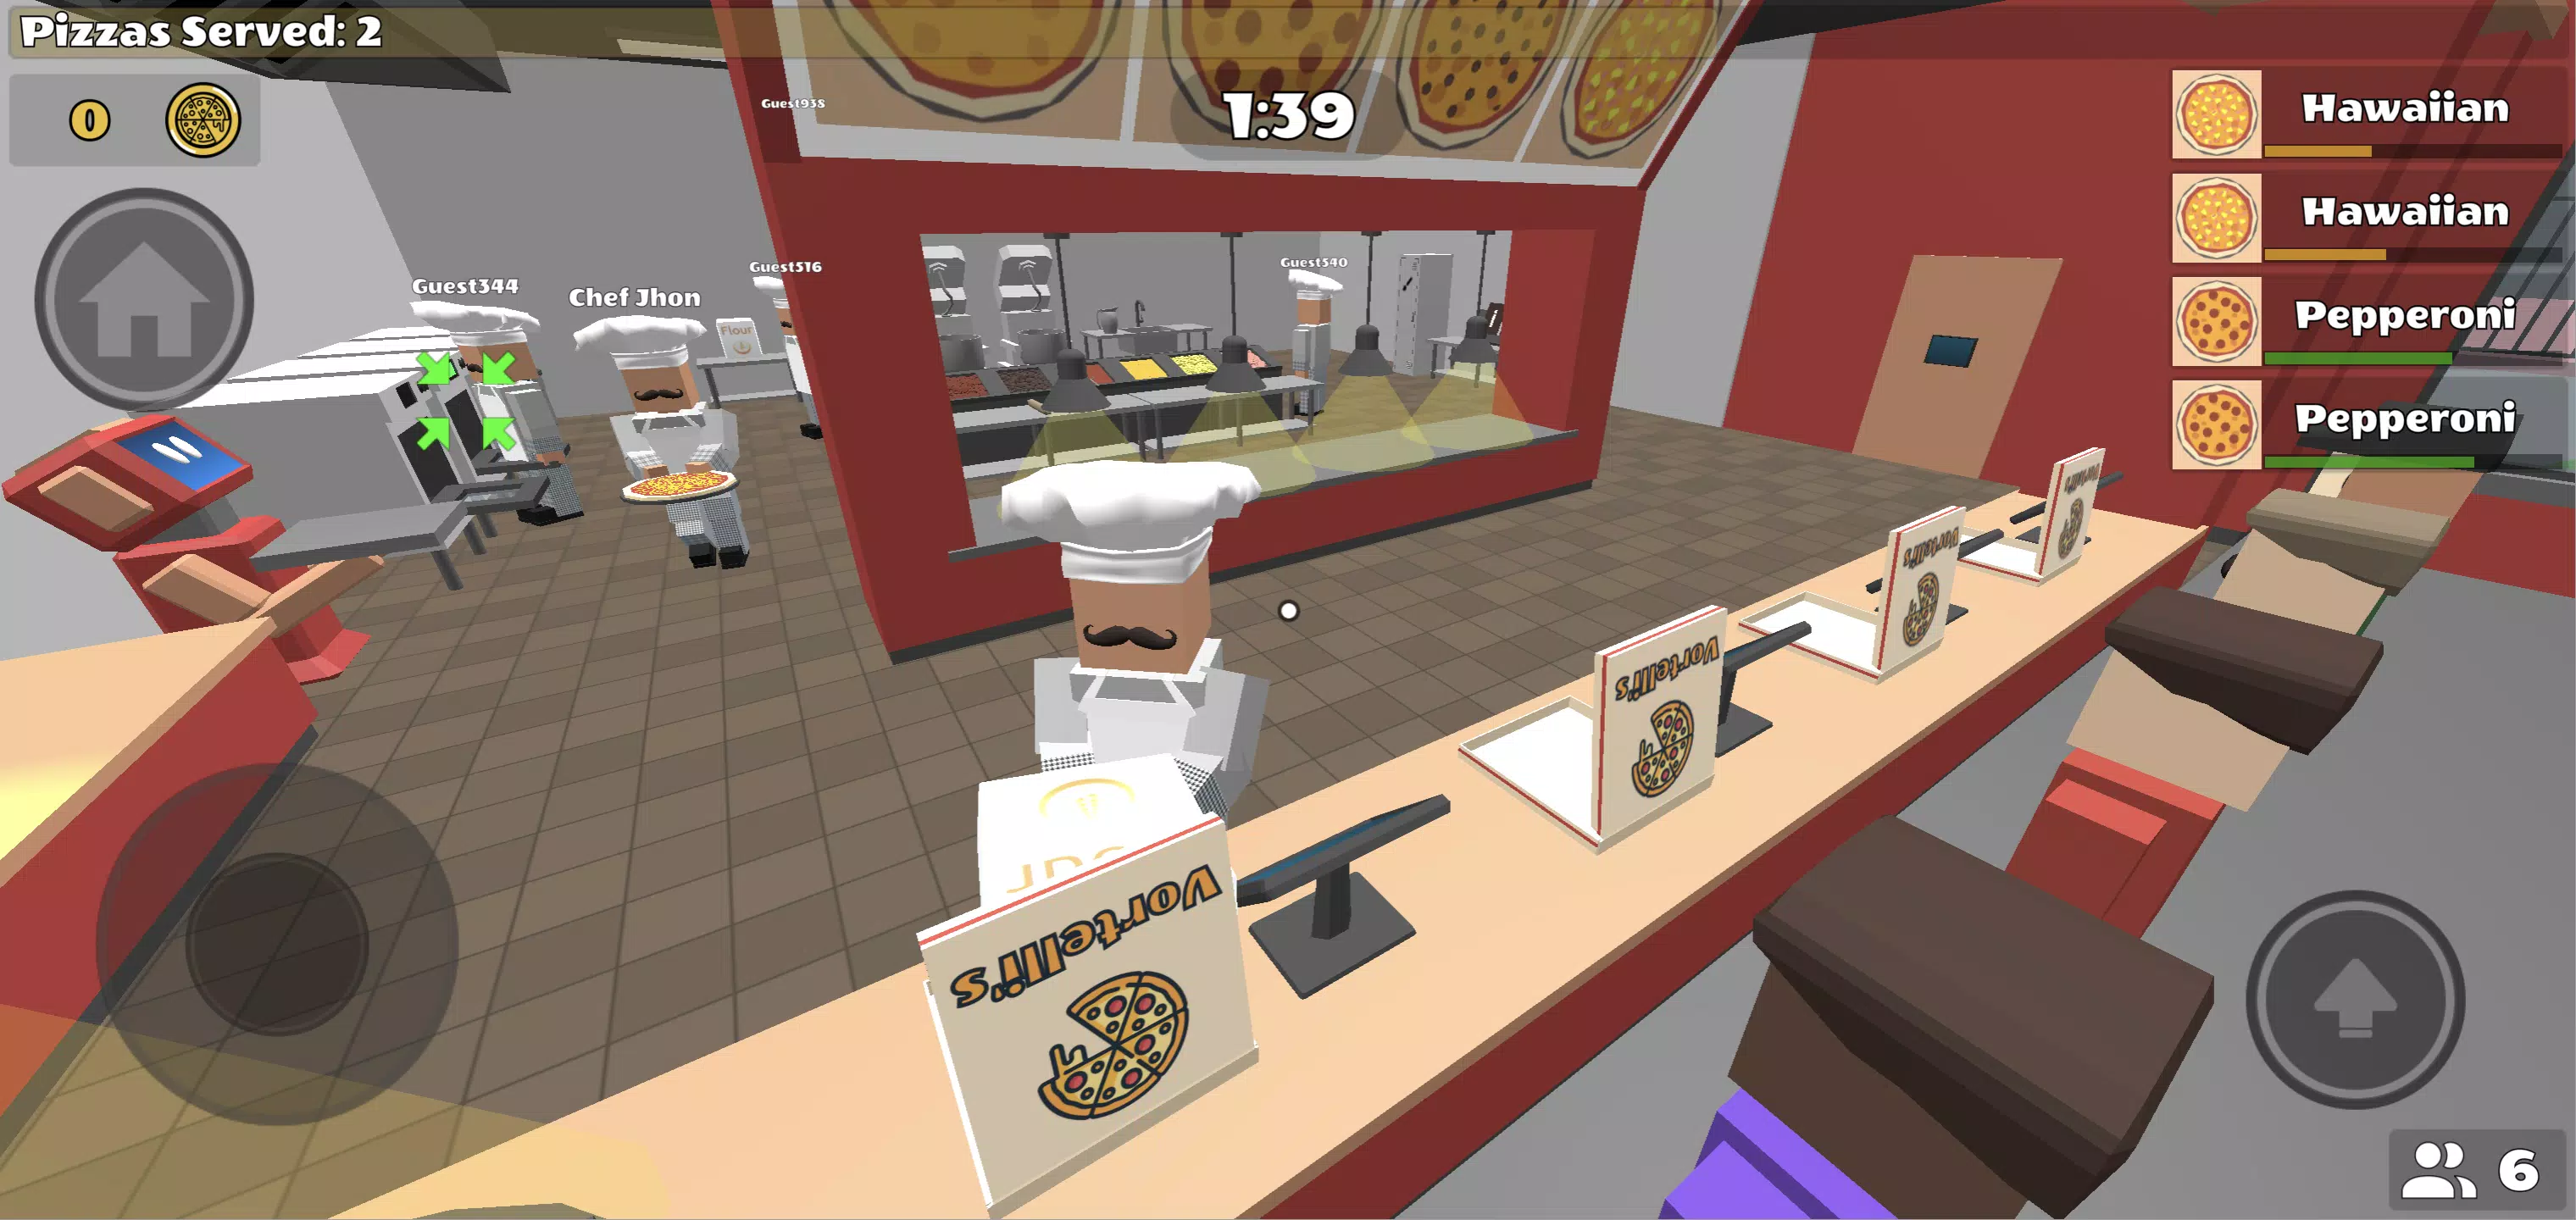 Dolly's Pizza Apk Download for Android- Latest version 2.7- com